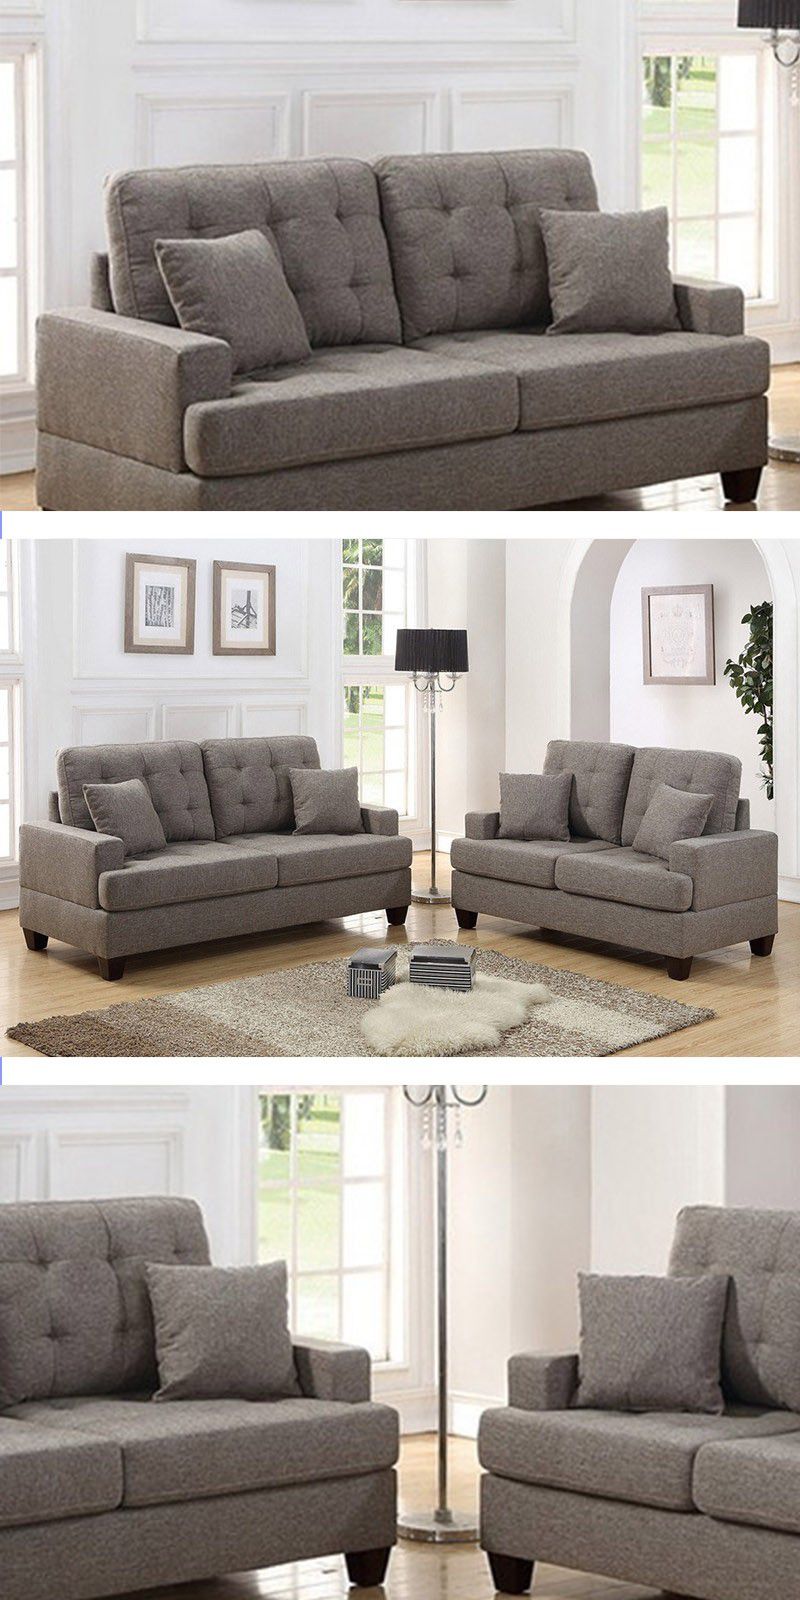 LOVESEAT & SOFA | LIVING ROOM | COUCH | SECTIONAL | JUEGO DE SALA | DELIVERY FREE BY TMF 🚚📦